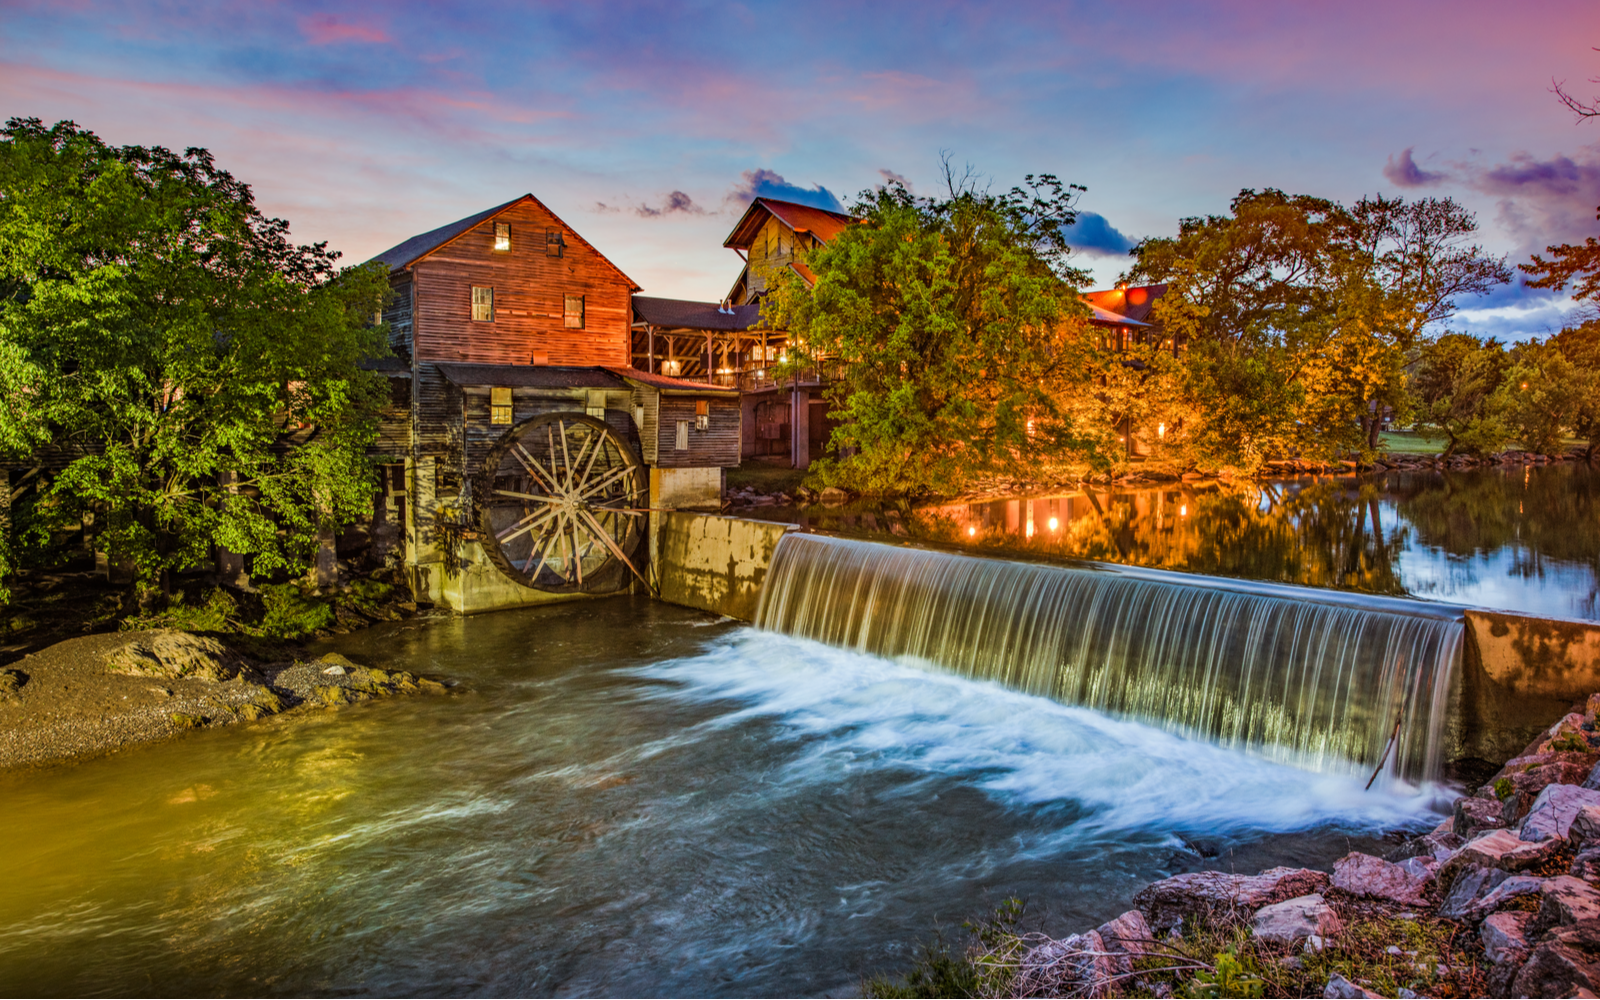 21 Things to Do in Pigeon Forge in 2022